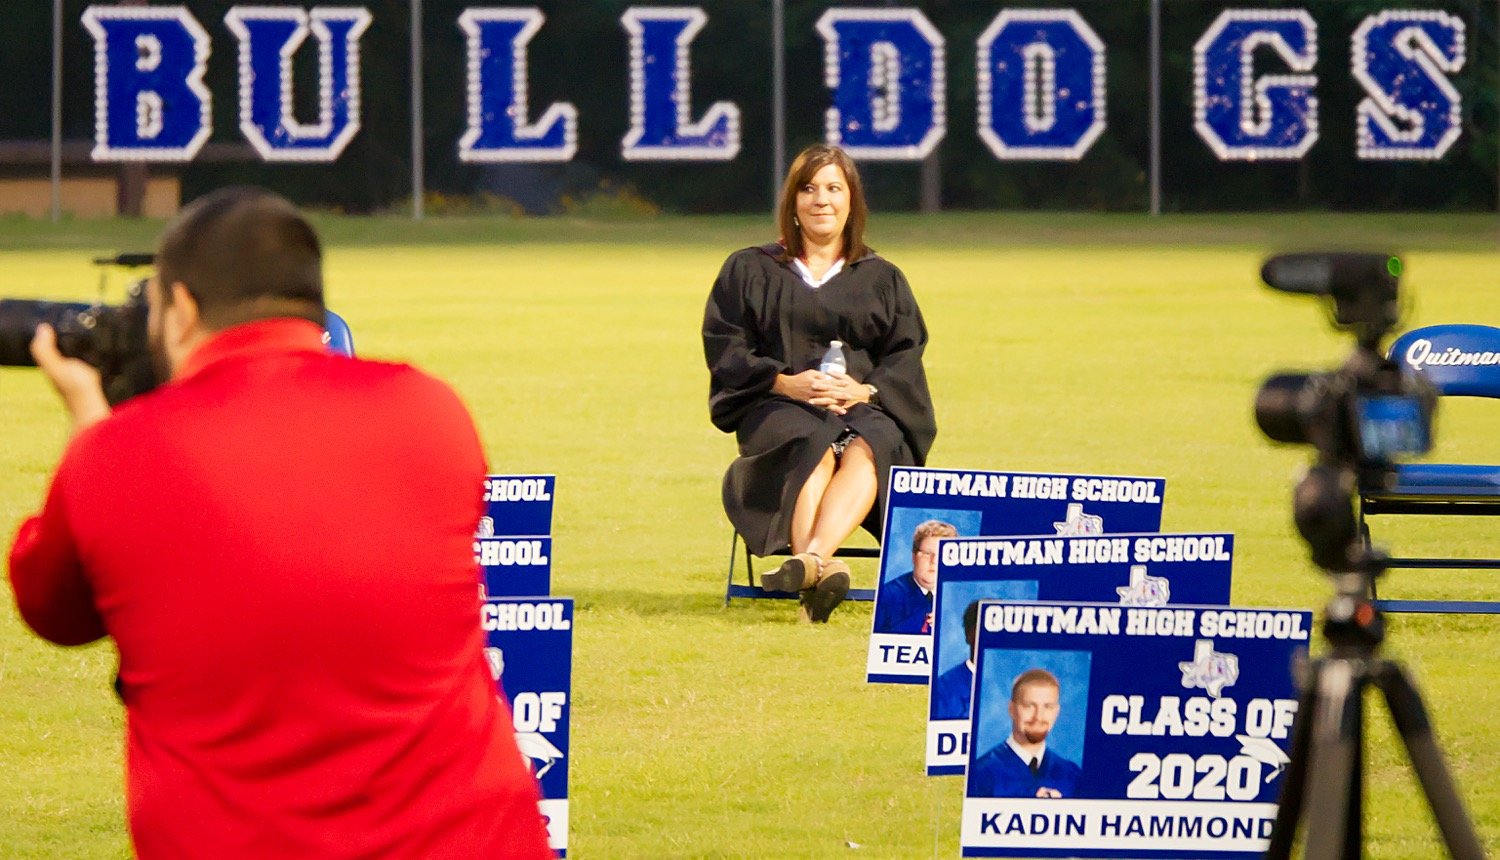 Quitman High School Principal Dana Hamrick takes a break from announcing graduates as photographer Chad Parish shoots the virtual graduation Monday night at Bud Moody Stadium. Parish plans to edit the individual videos into a virtual graduation which will be shown by the school district at 7 p.m. on Friday, May 22, which was to be the time for the actual graduation.